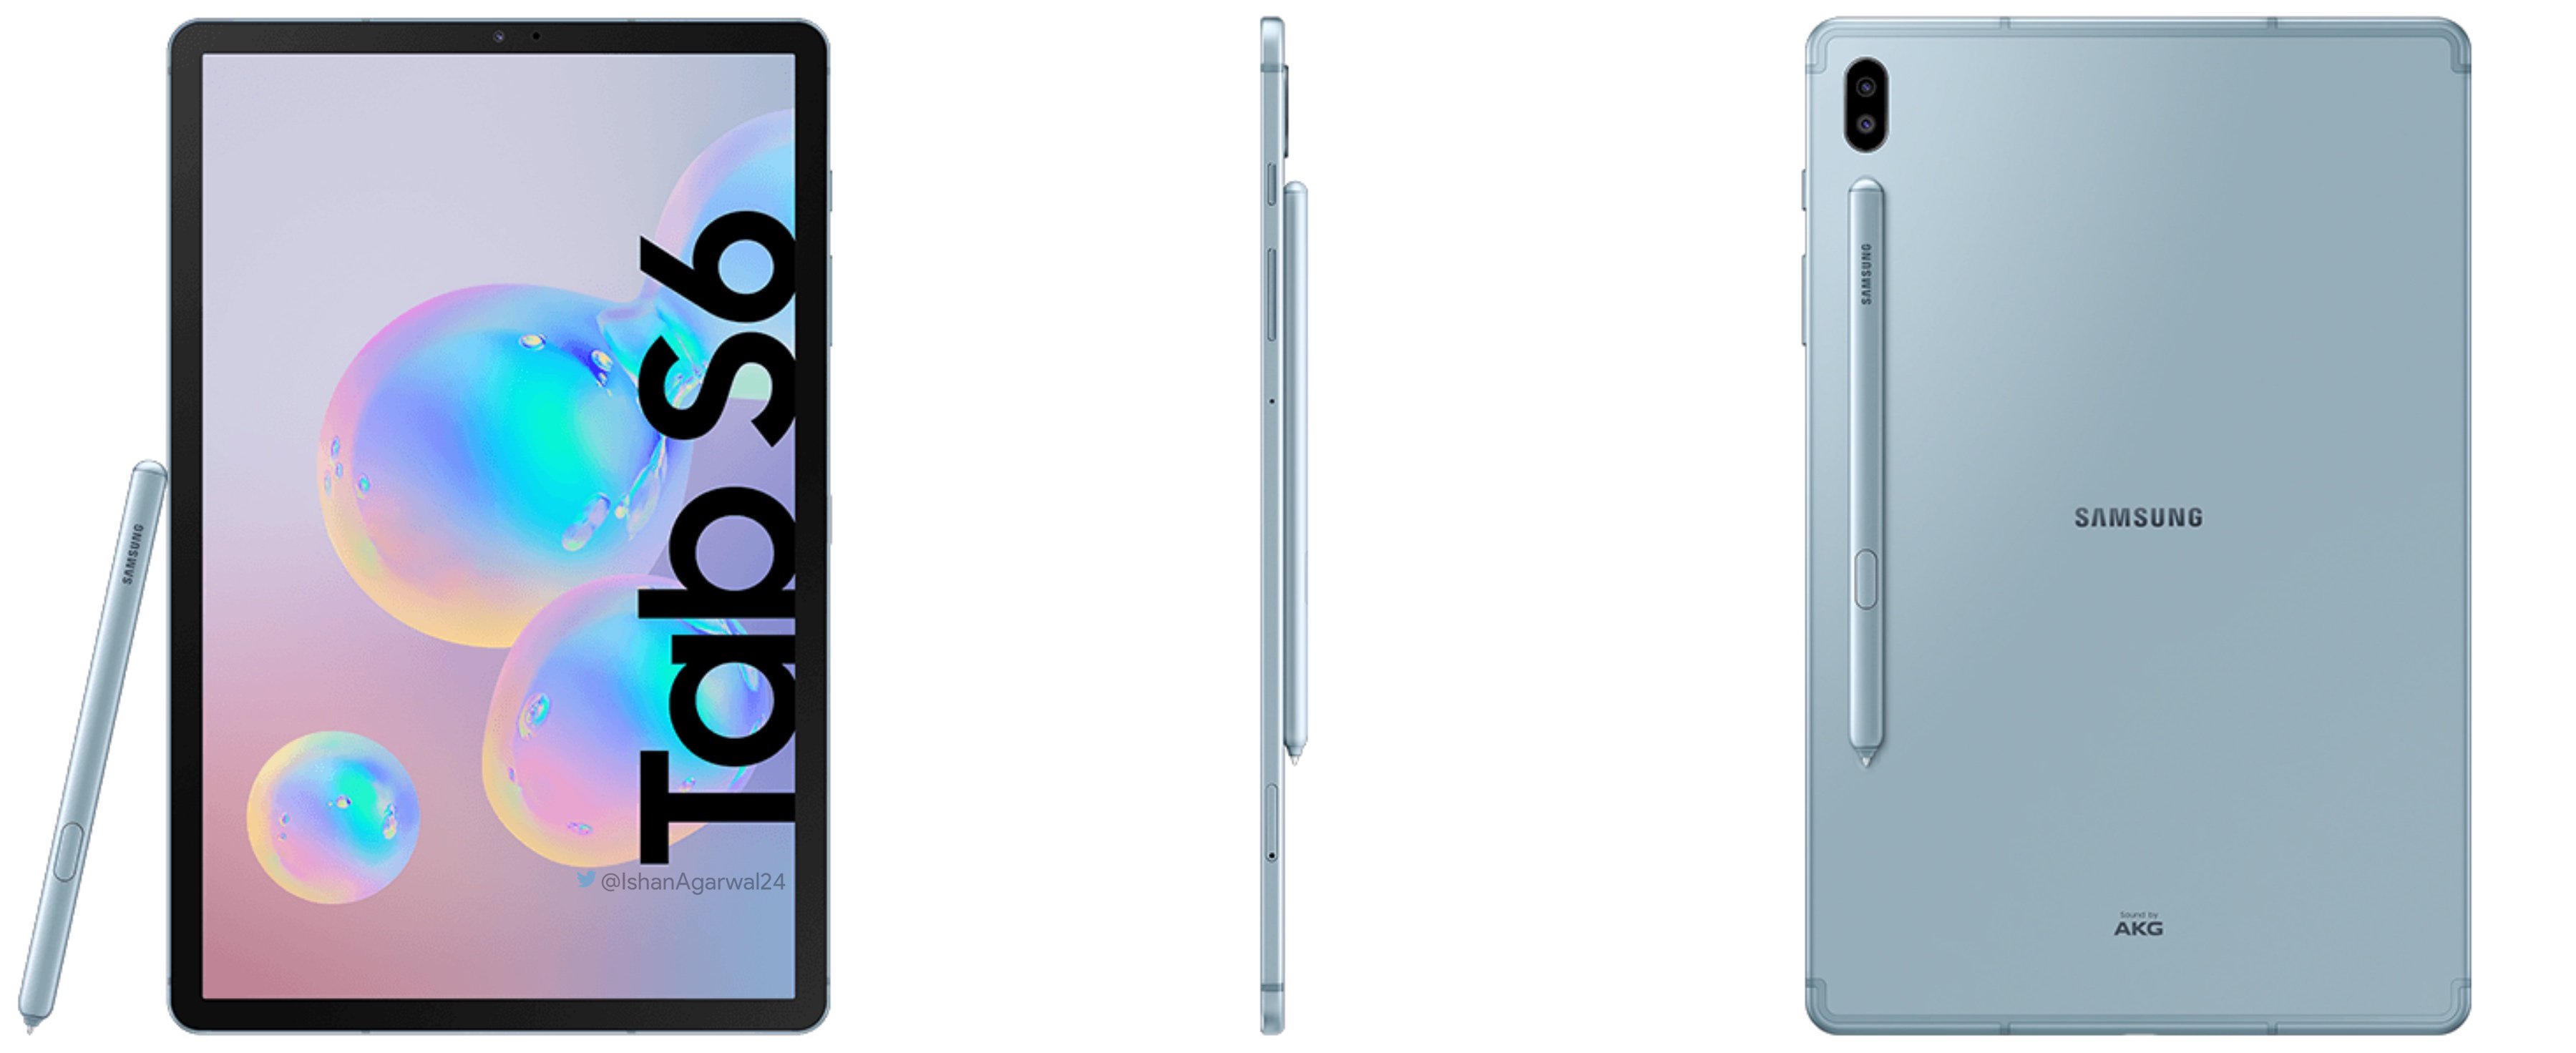 Samsung Galaxy Tab S6 Specs Leak Reveal Dimensions Battery And